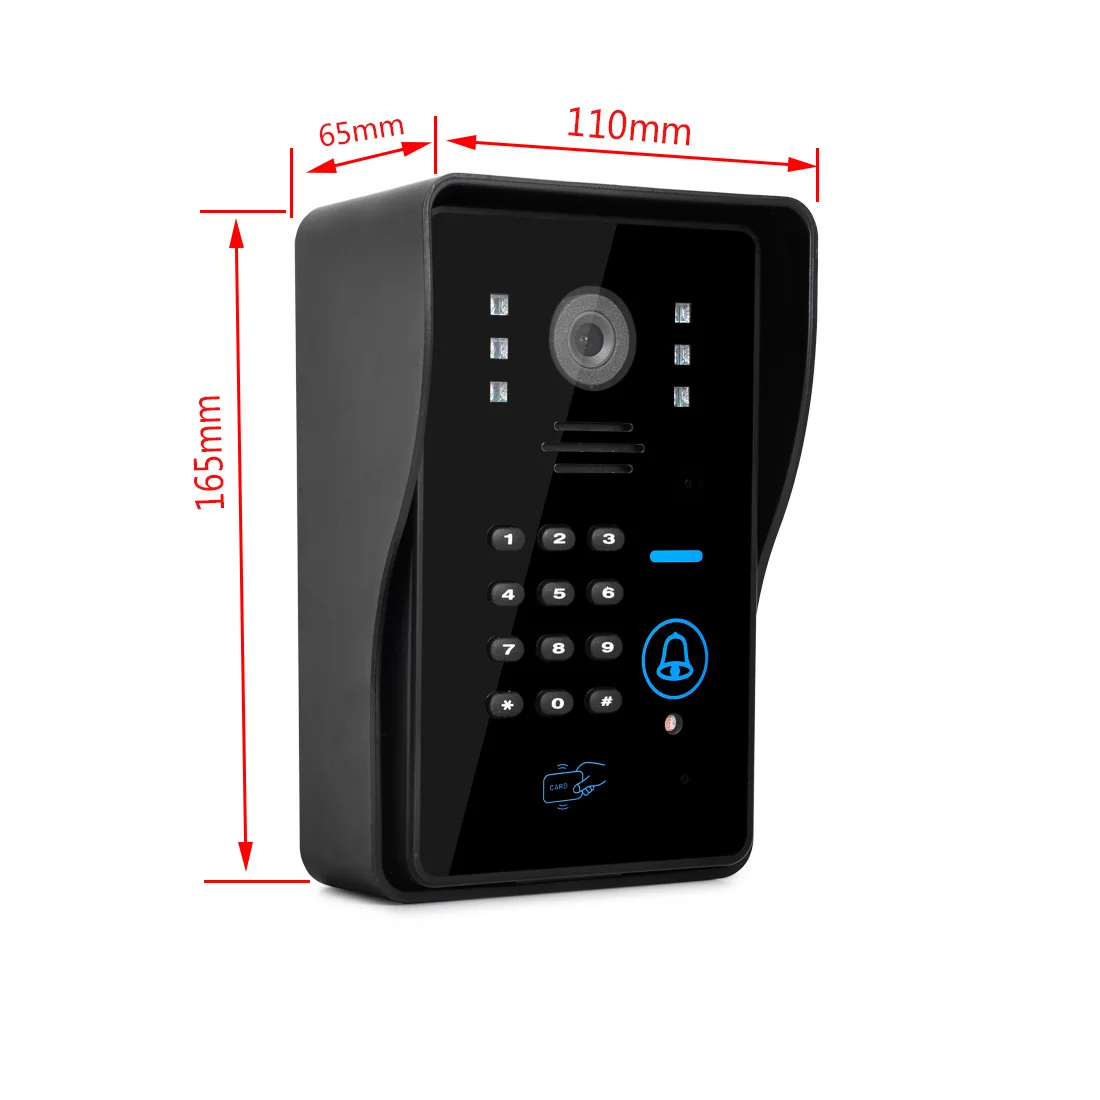 SYSD WiFi IP Camera Video Doorbell 720P Camera Night Vision with RFID and Face Recognition unlock enlarge